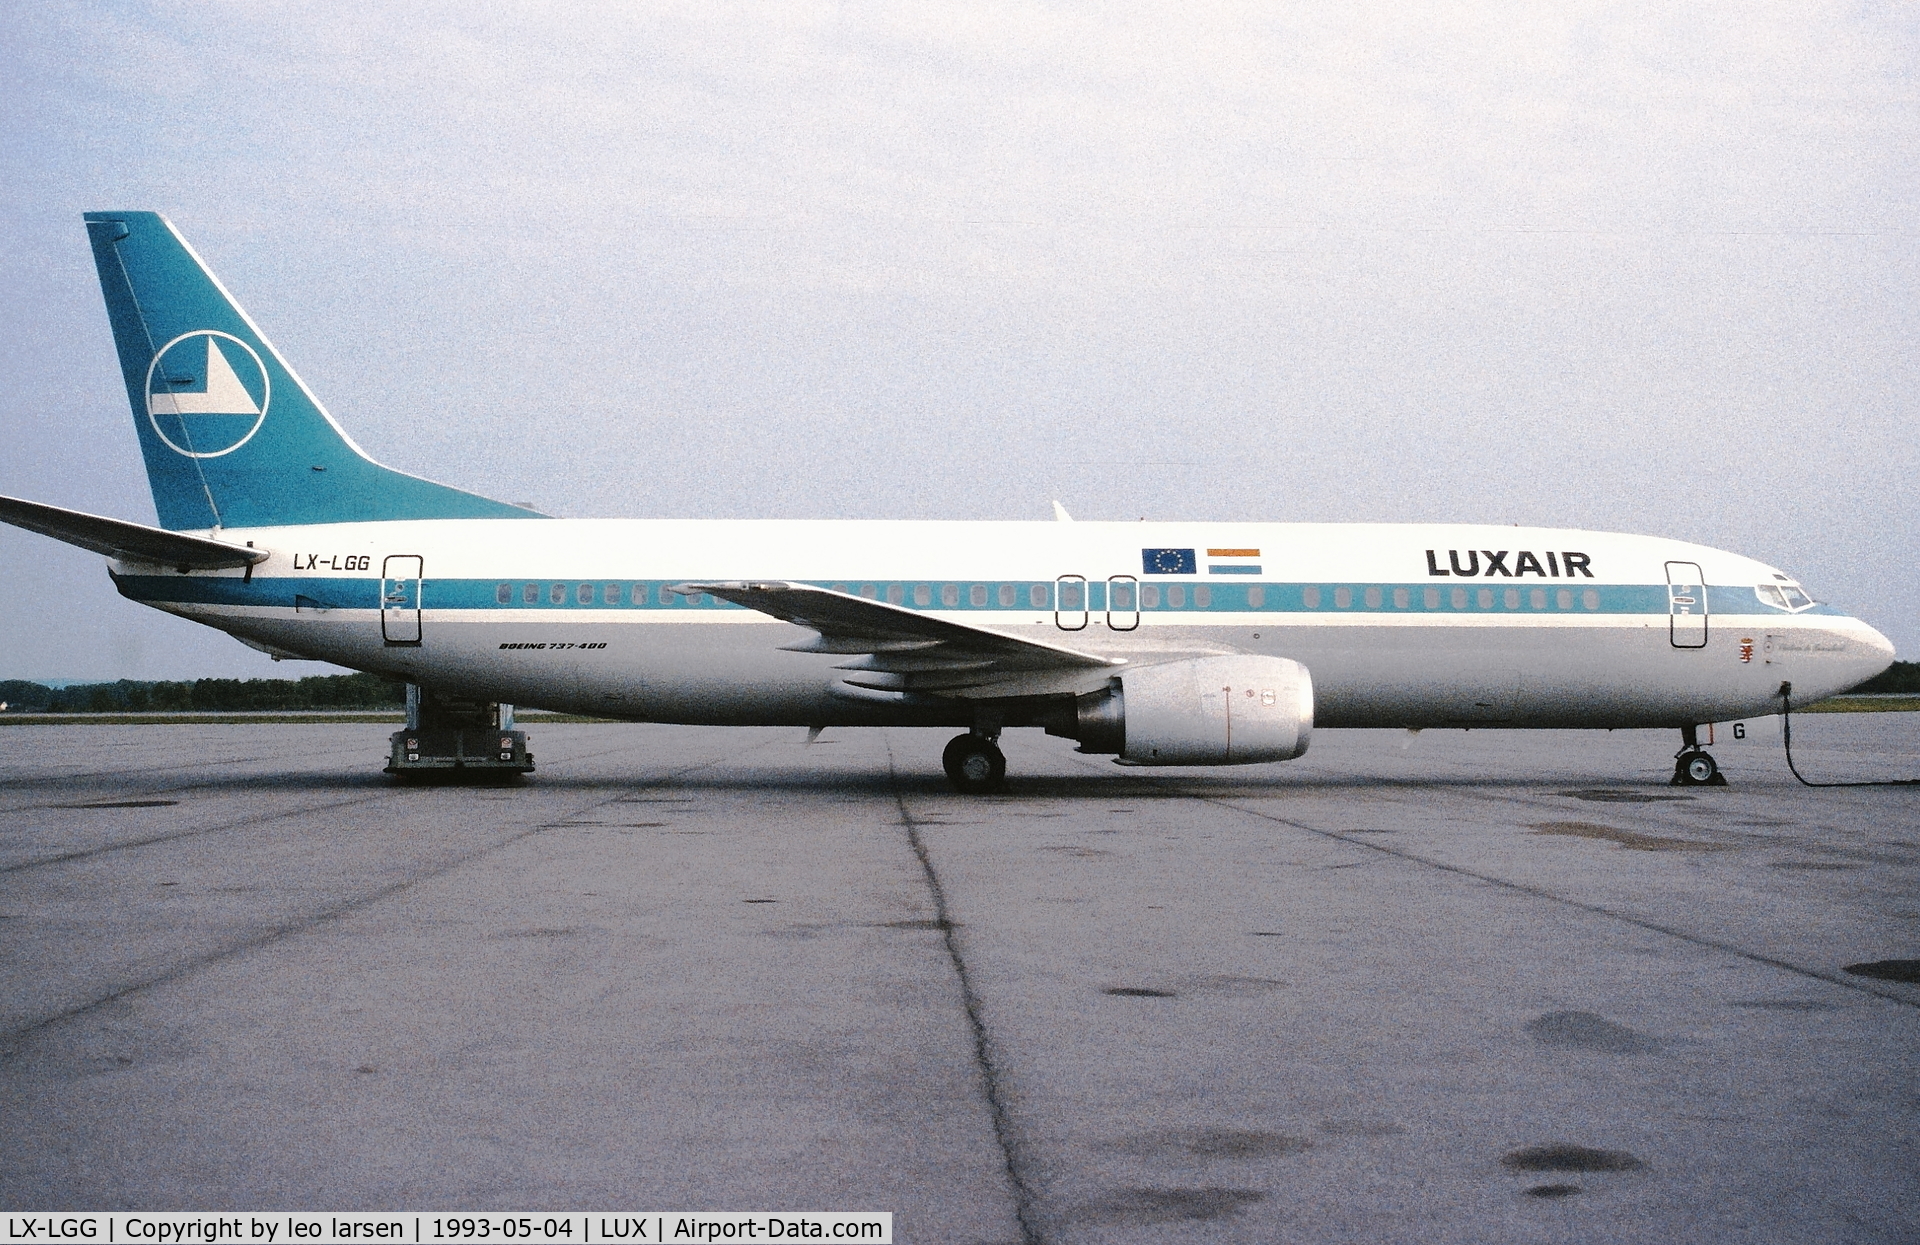 LX-LGG, 1992 Boeing 737-4C9 C/N 26437, Luxembourg 4.5.1993